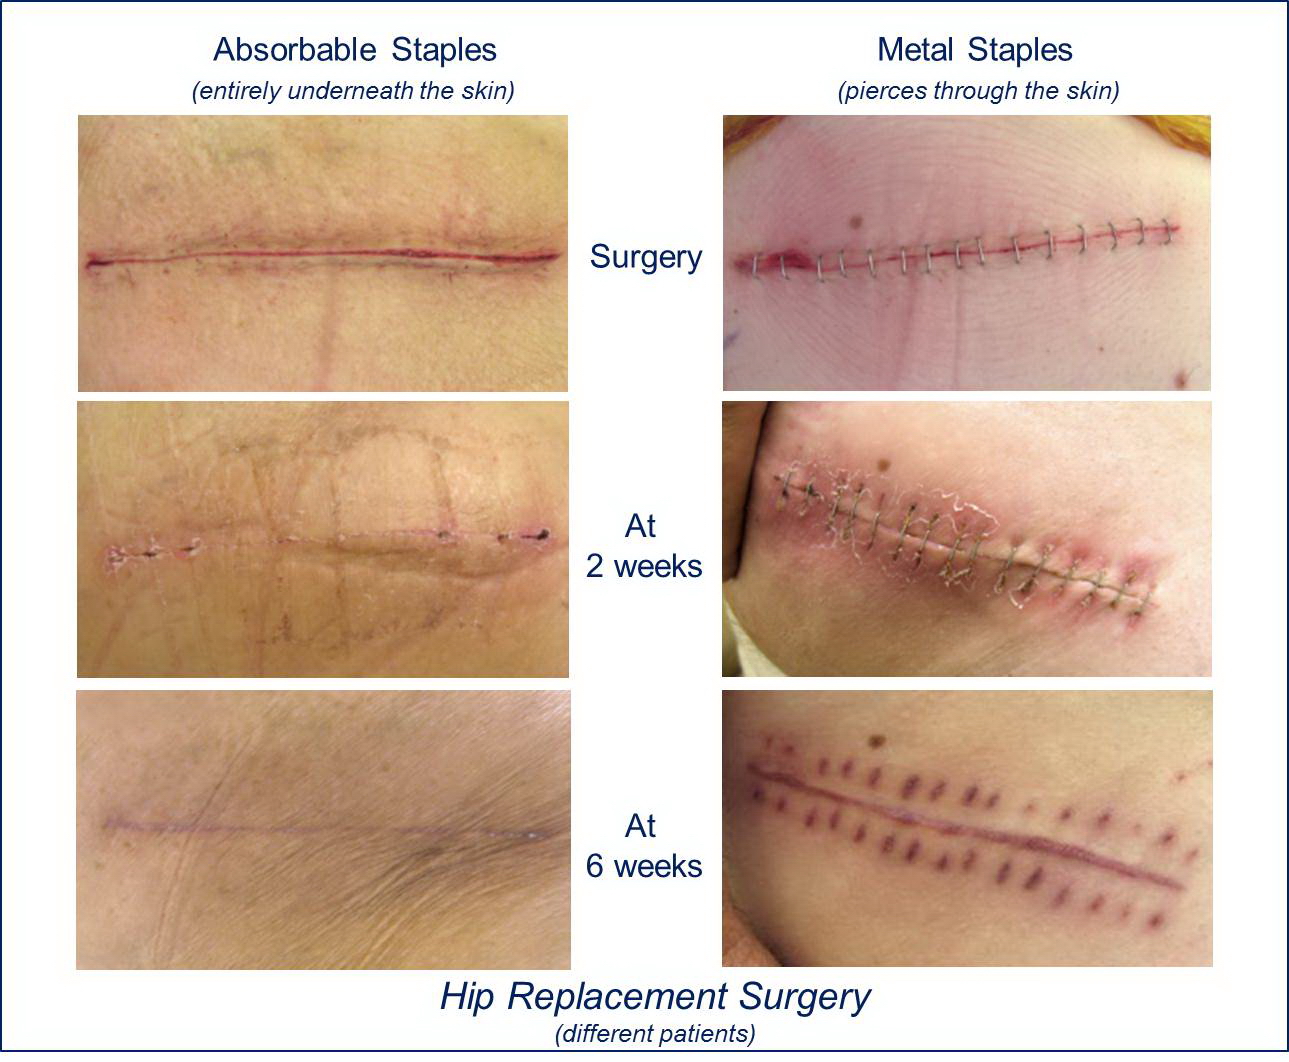 Comparison of INSORB Absorbable Staples vs. Metal Staples in Hip Replacement Surgery